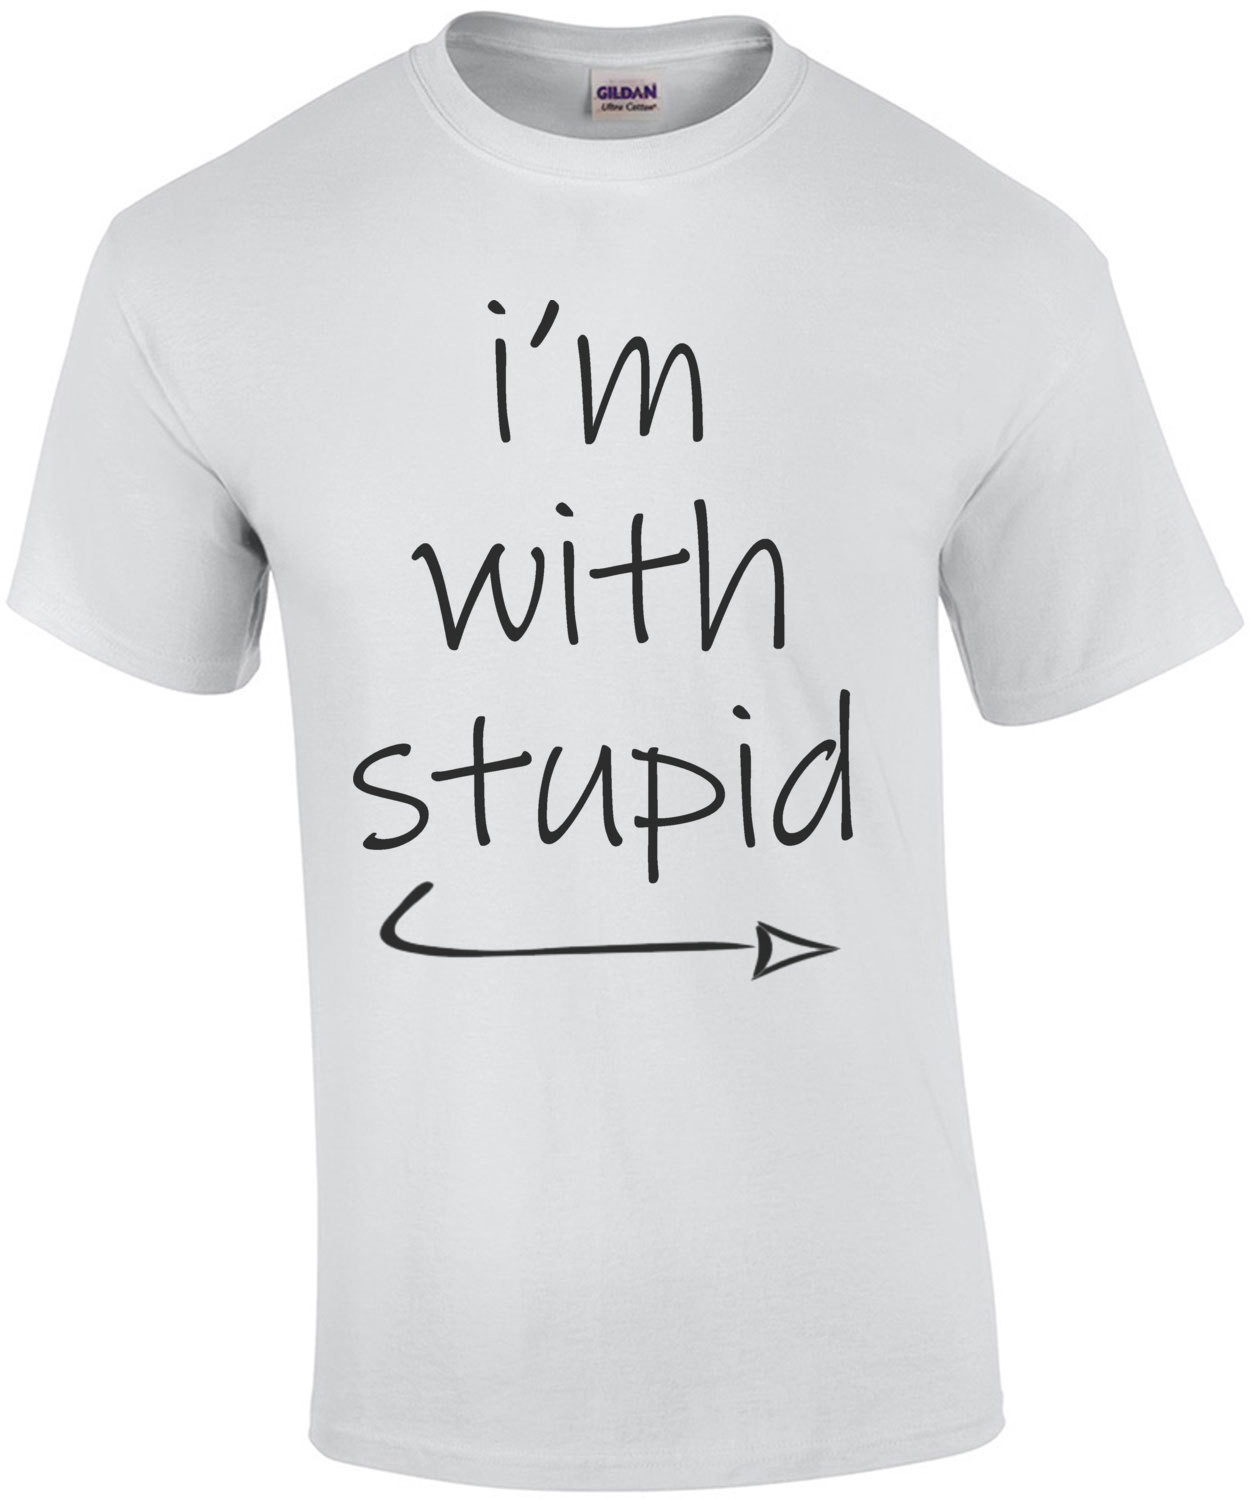 i'm with stupid - funny couple's t-shirt